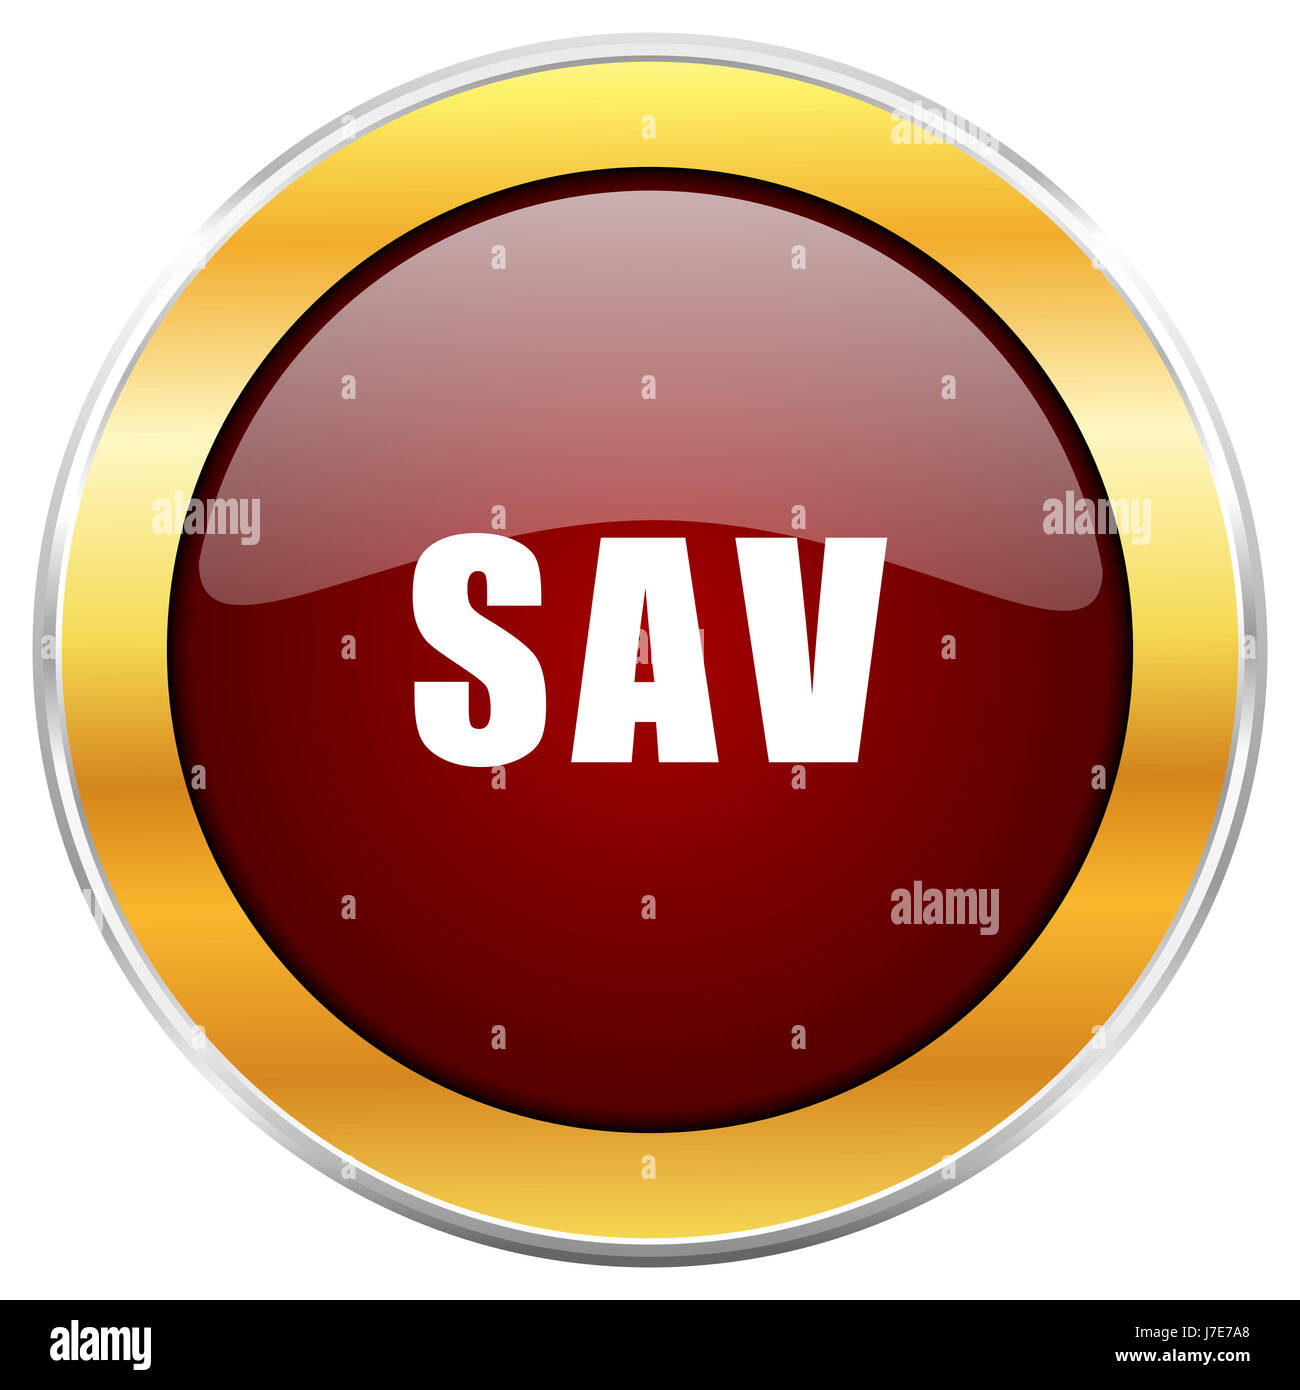 Sav red web icon with golden border isolated on white background. Round glossy button. Stock Photo